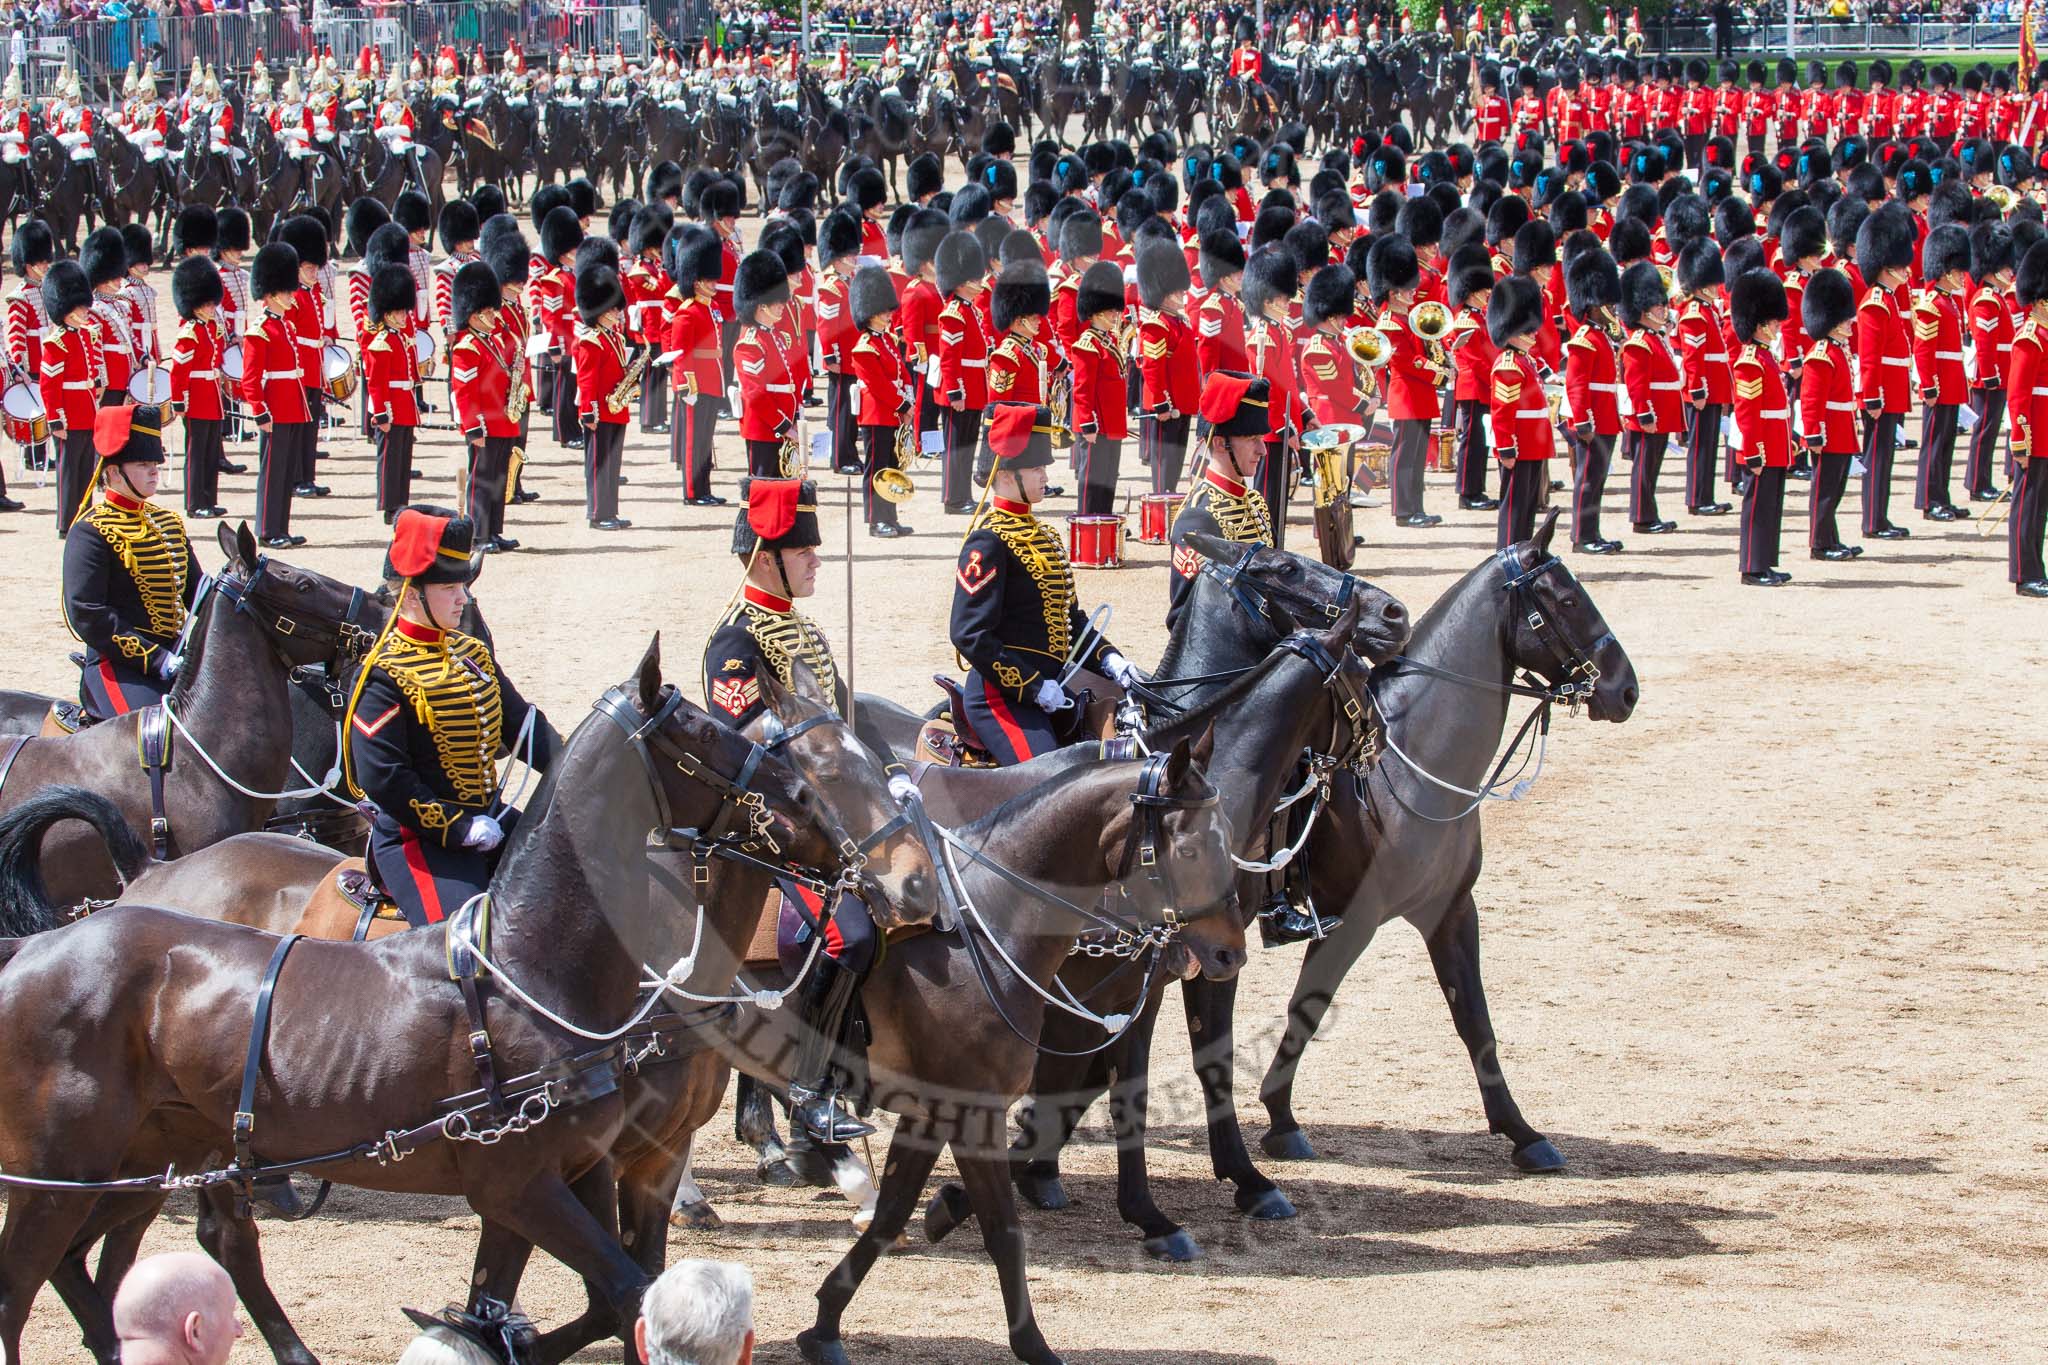 Trooping the Colour 2013: The Ride Past - the King's Troop Royal Horse Artillery. Image #685, 15 June 2013 11:54 Horse Guards Parade, London, UK